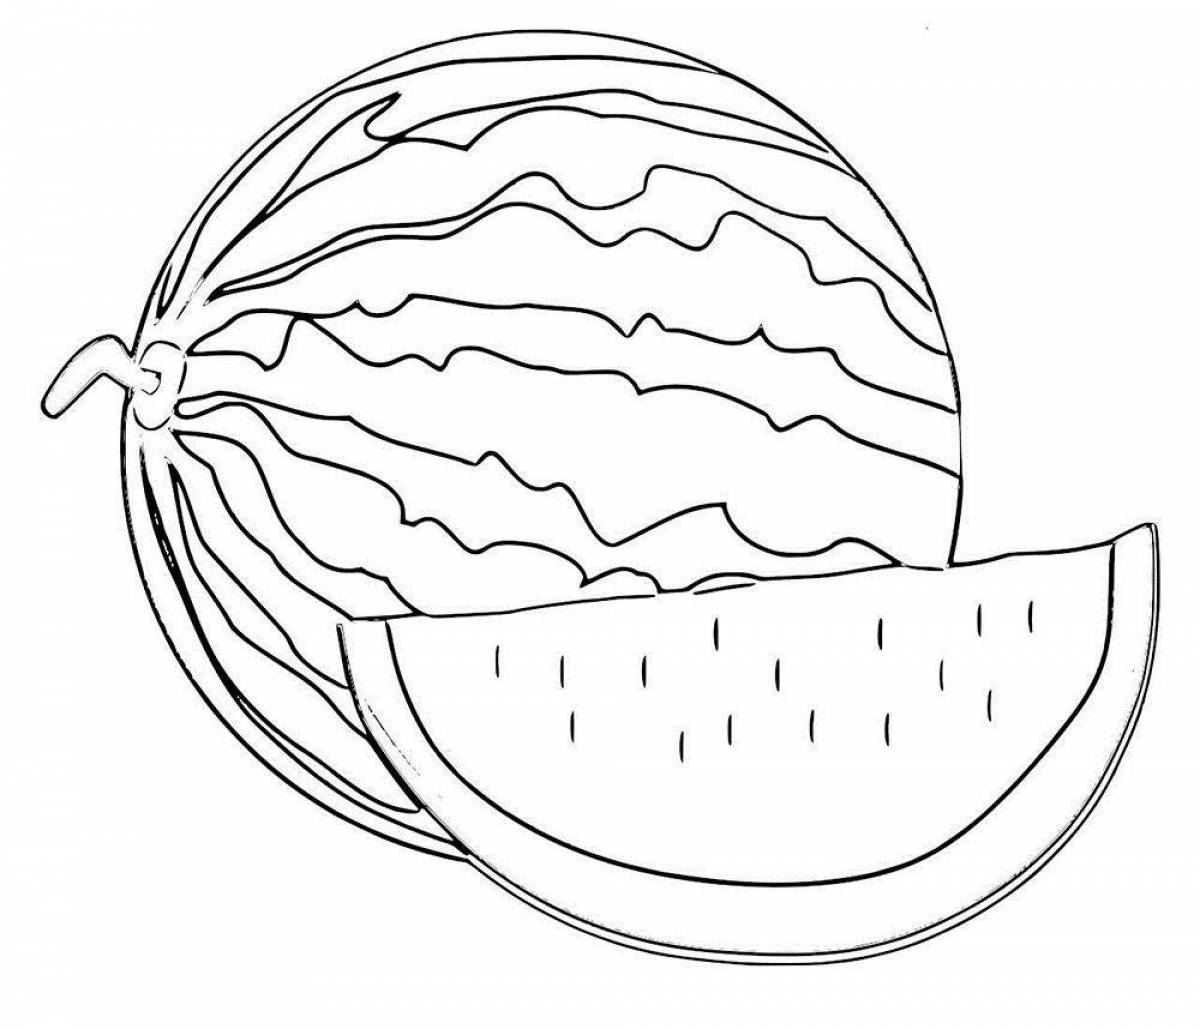 Playful watermelon coloring page